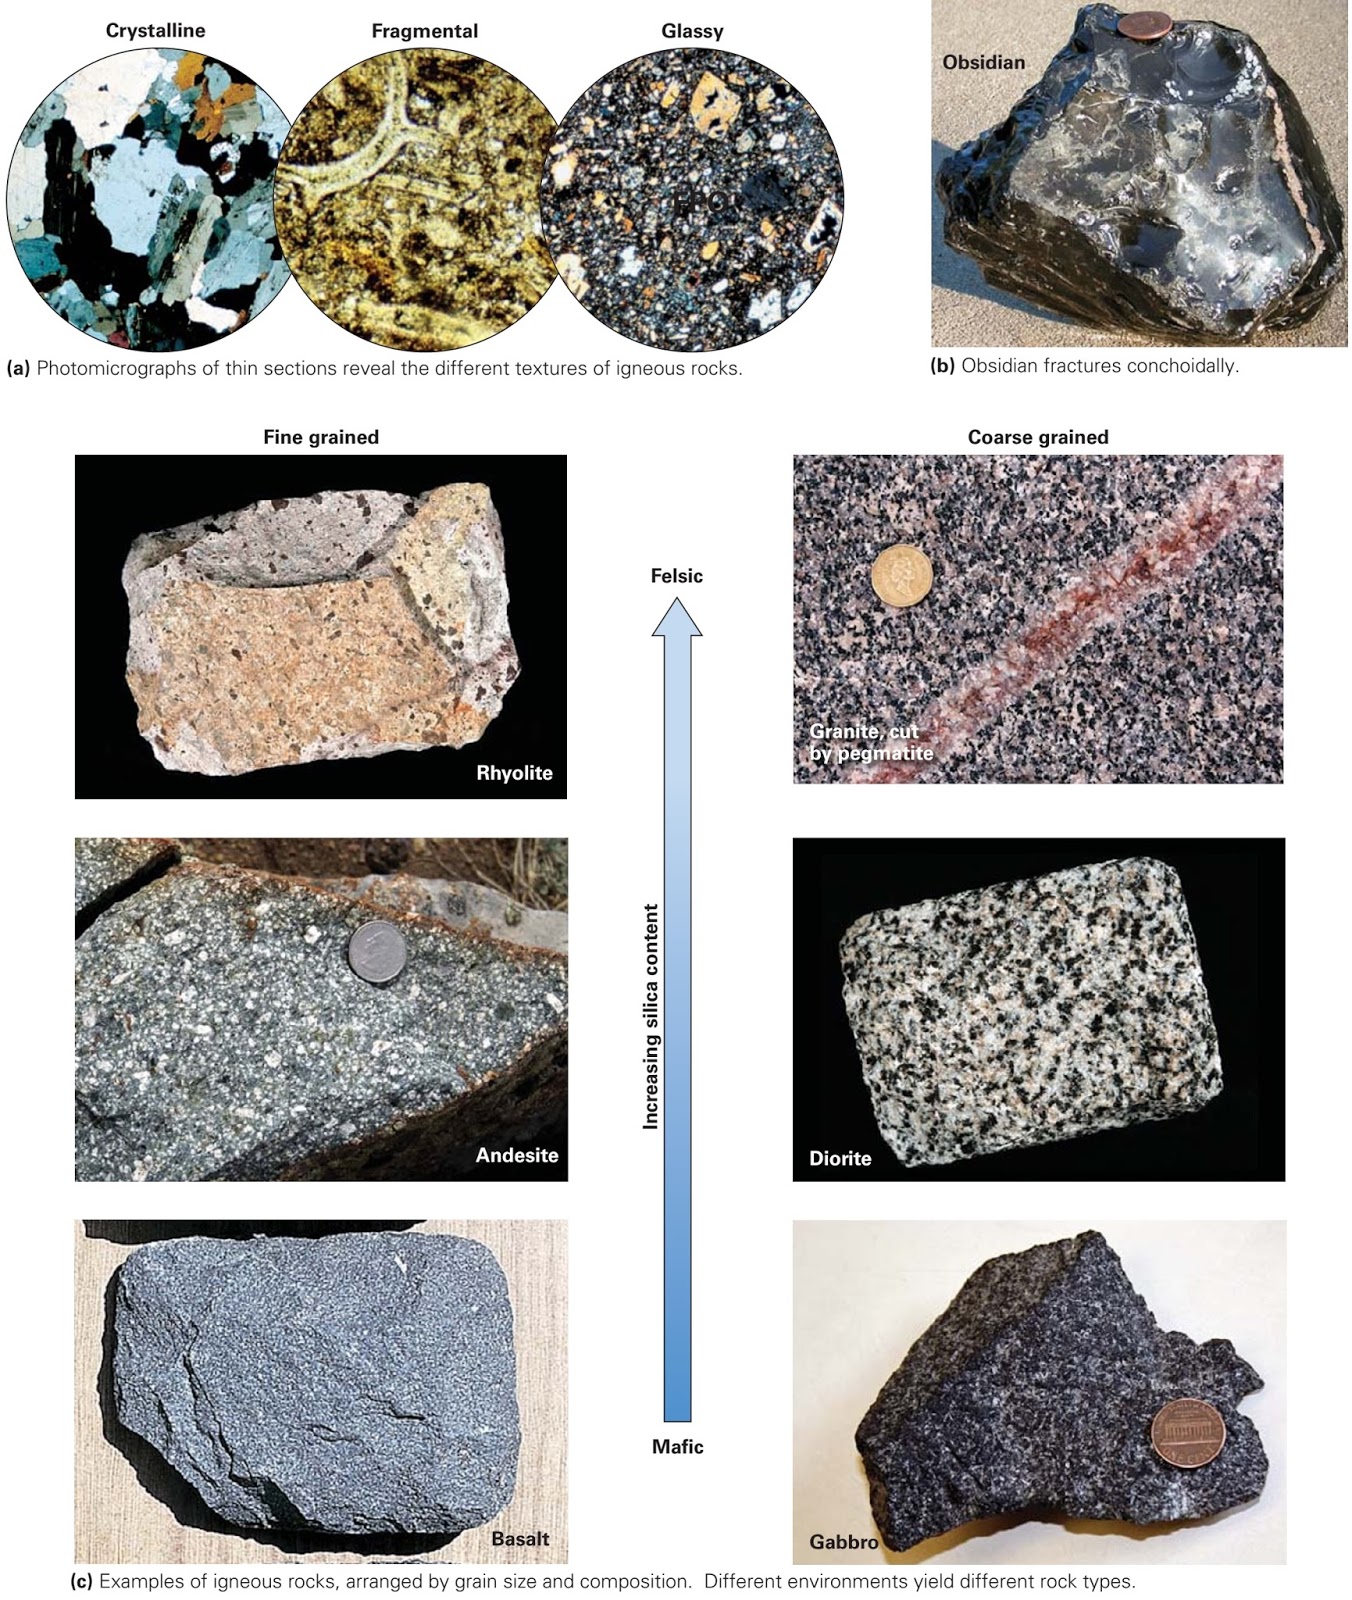 How Do You Describe an Igneous Rock? ~ Learning Geology